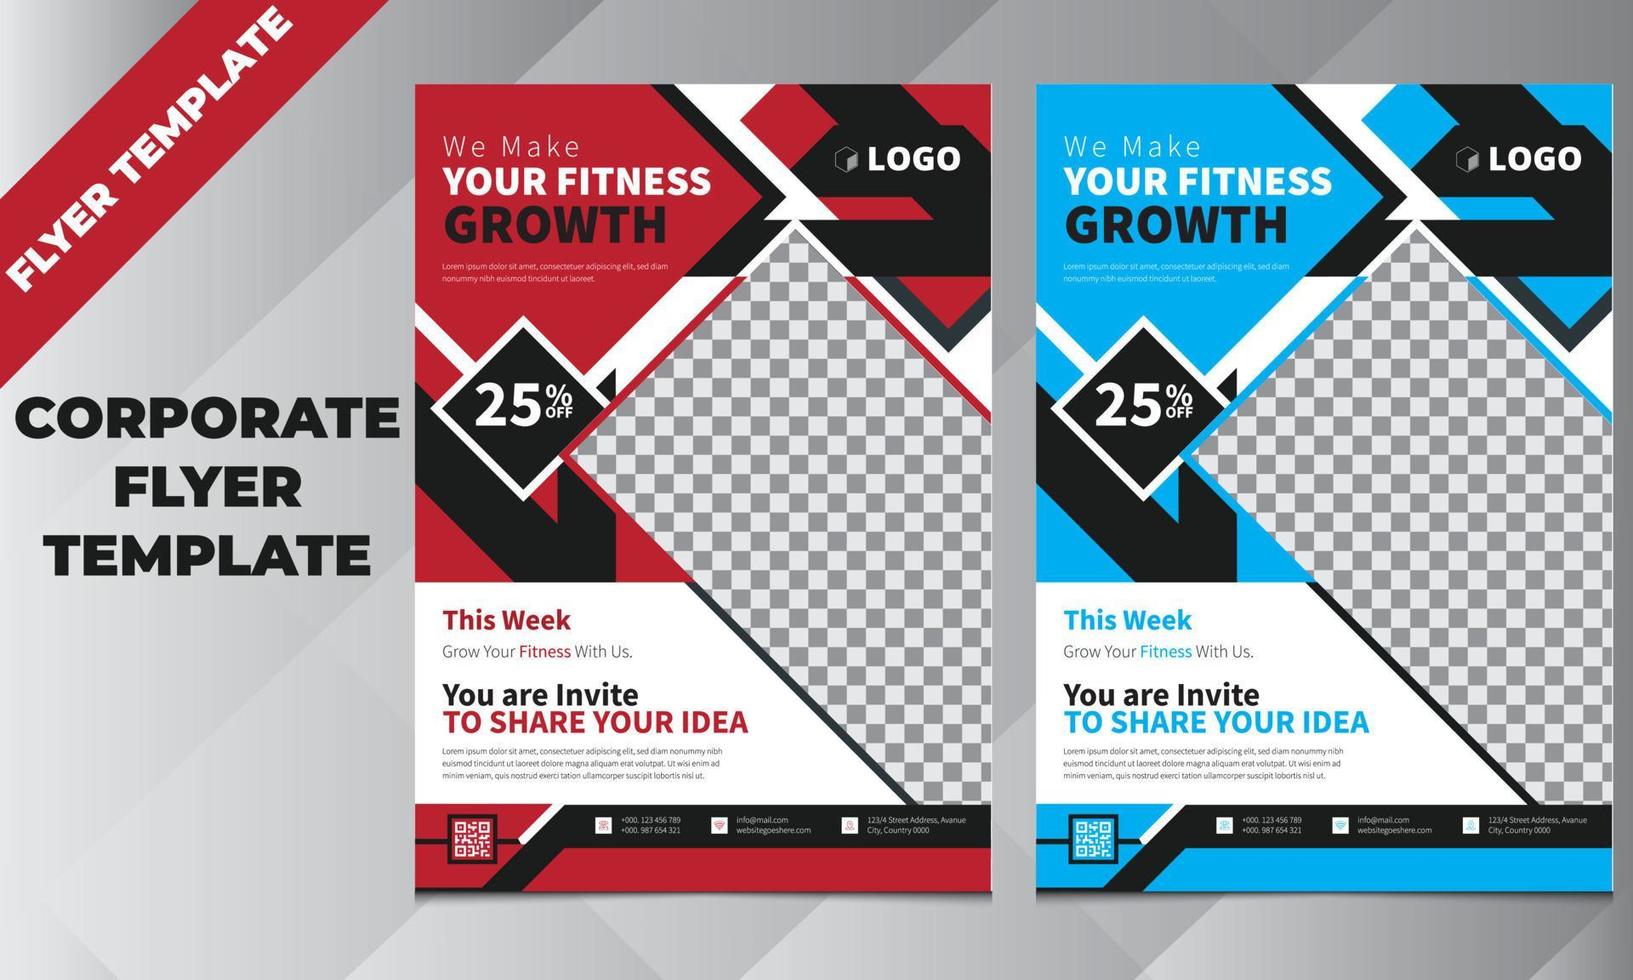 Fitness Flyer Template, Gym fitness flyer template with grunge shapes Premium Vector, Modern fitness and gym flyer, Sports Flyer Template, Boxing Gym Template,  Corporate Business marketing Brochure. vector